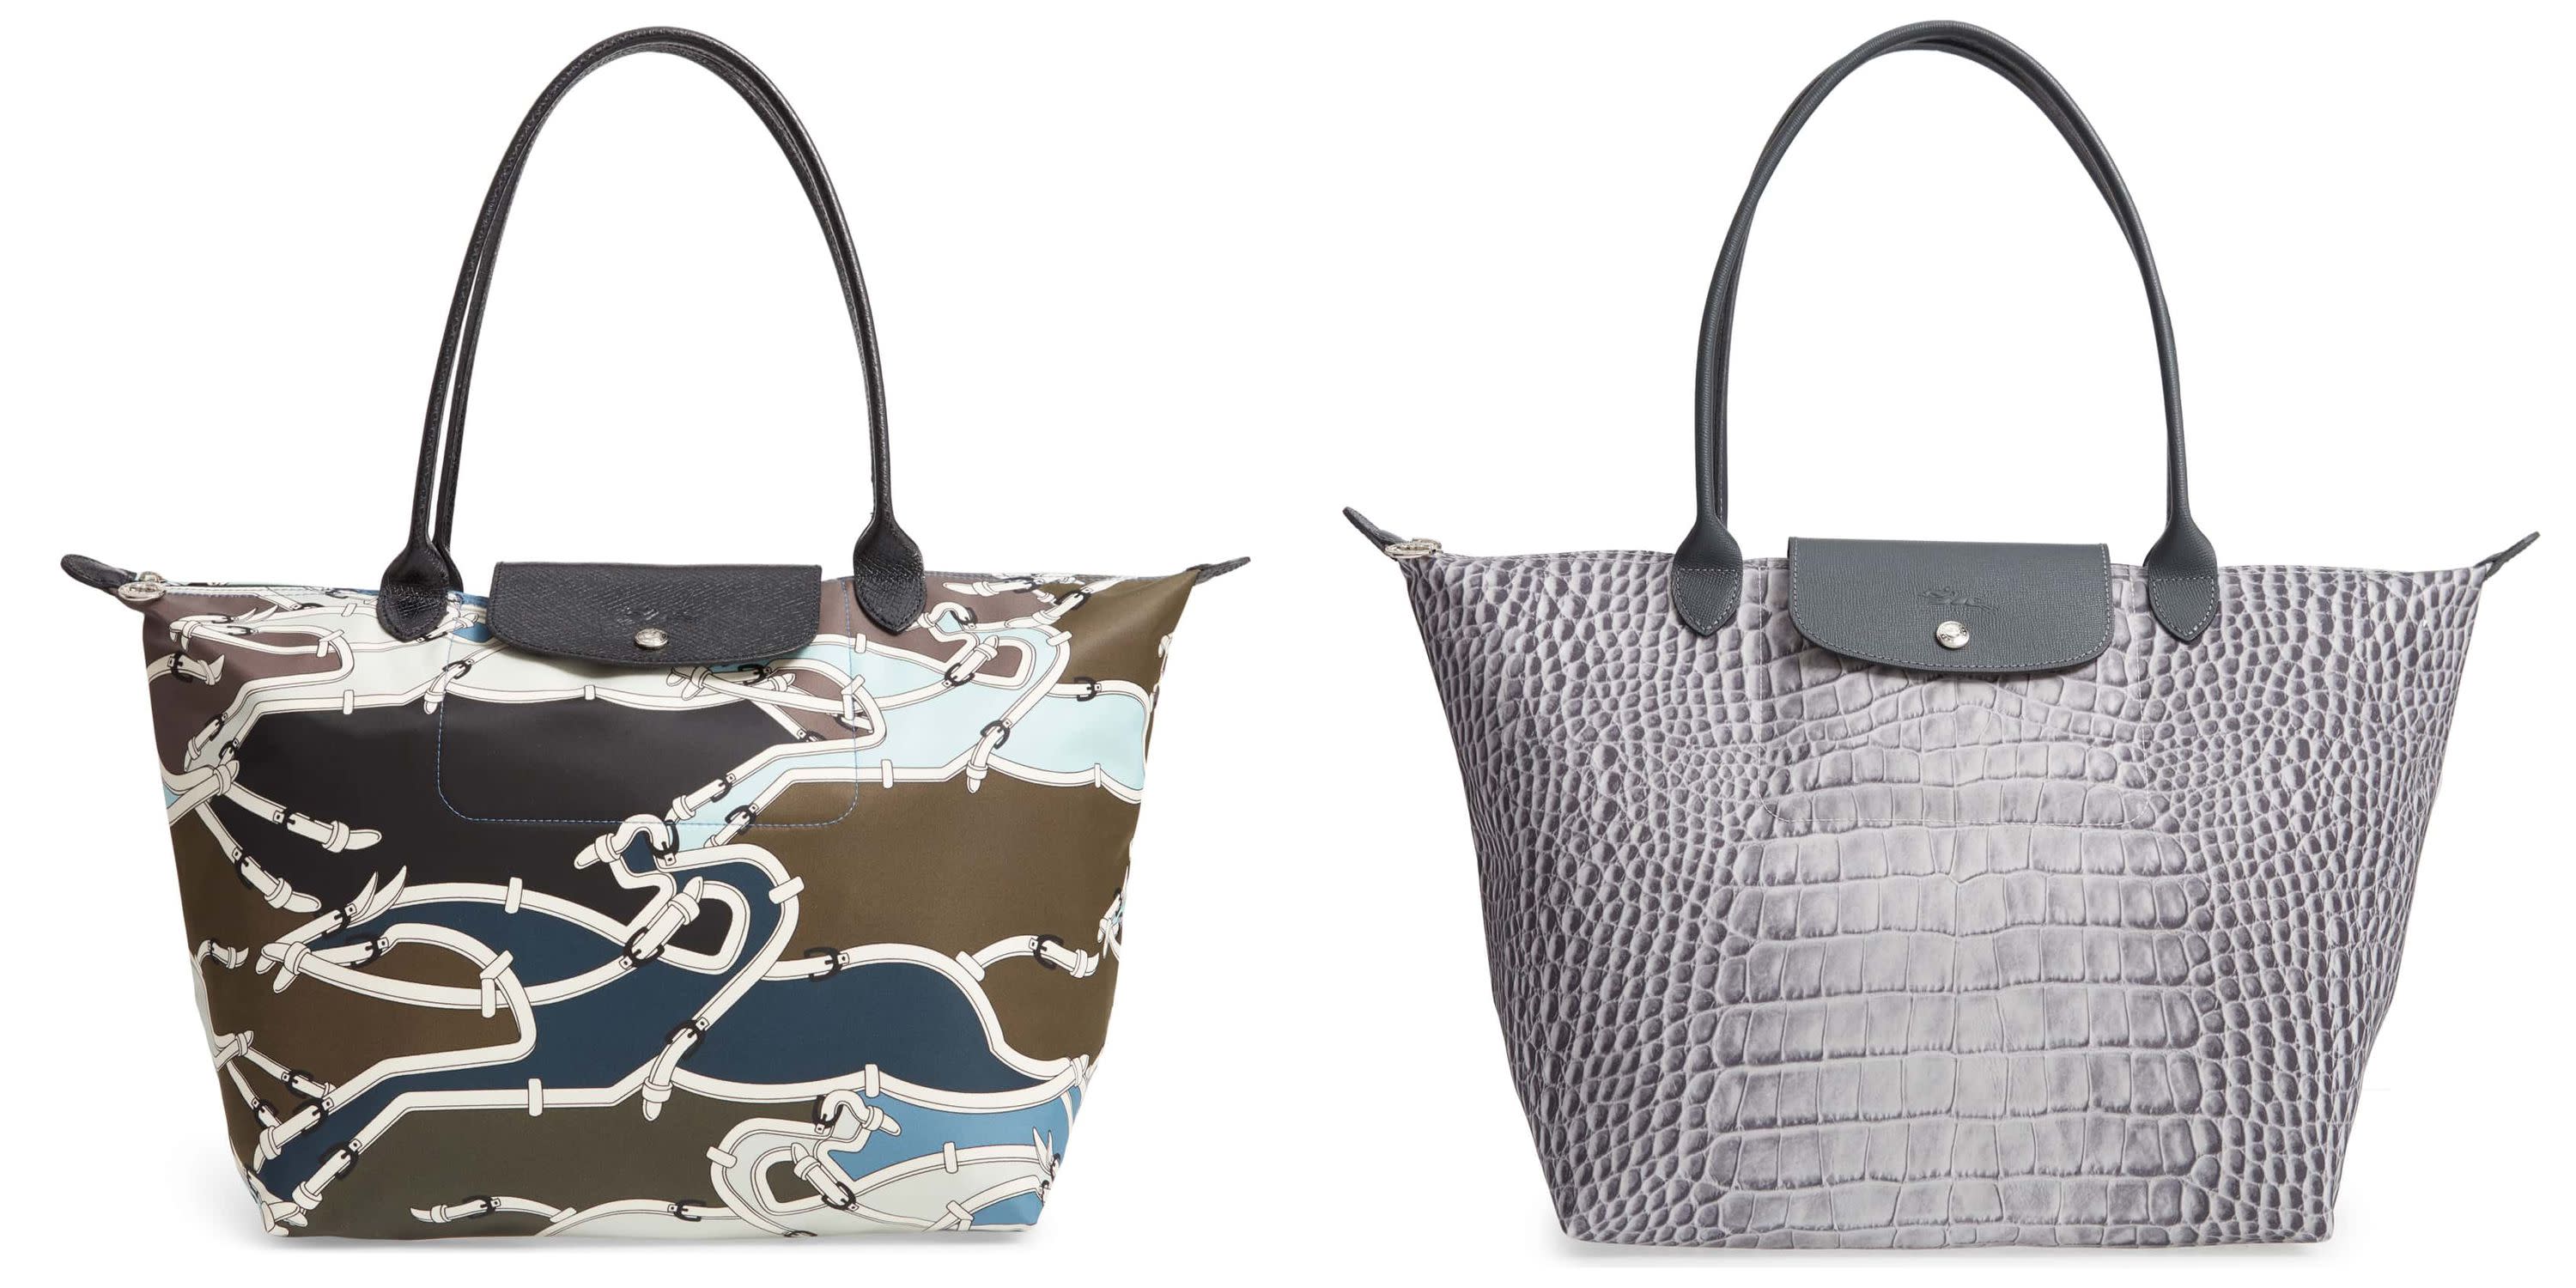 Longchamp Totes Are On Sale Just In Time For Holiday Gift-Giving